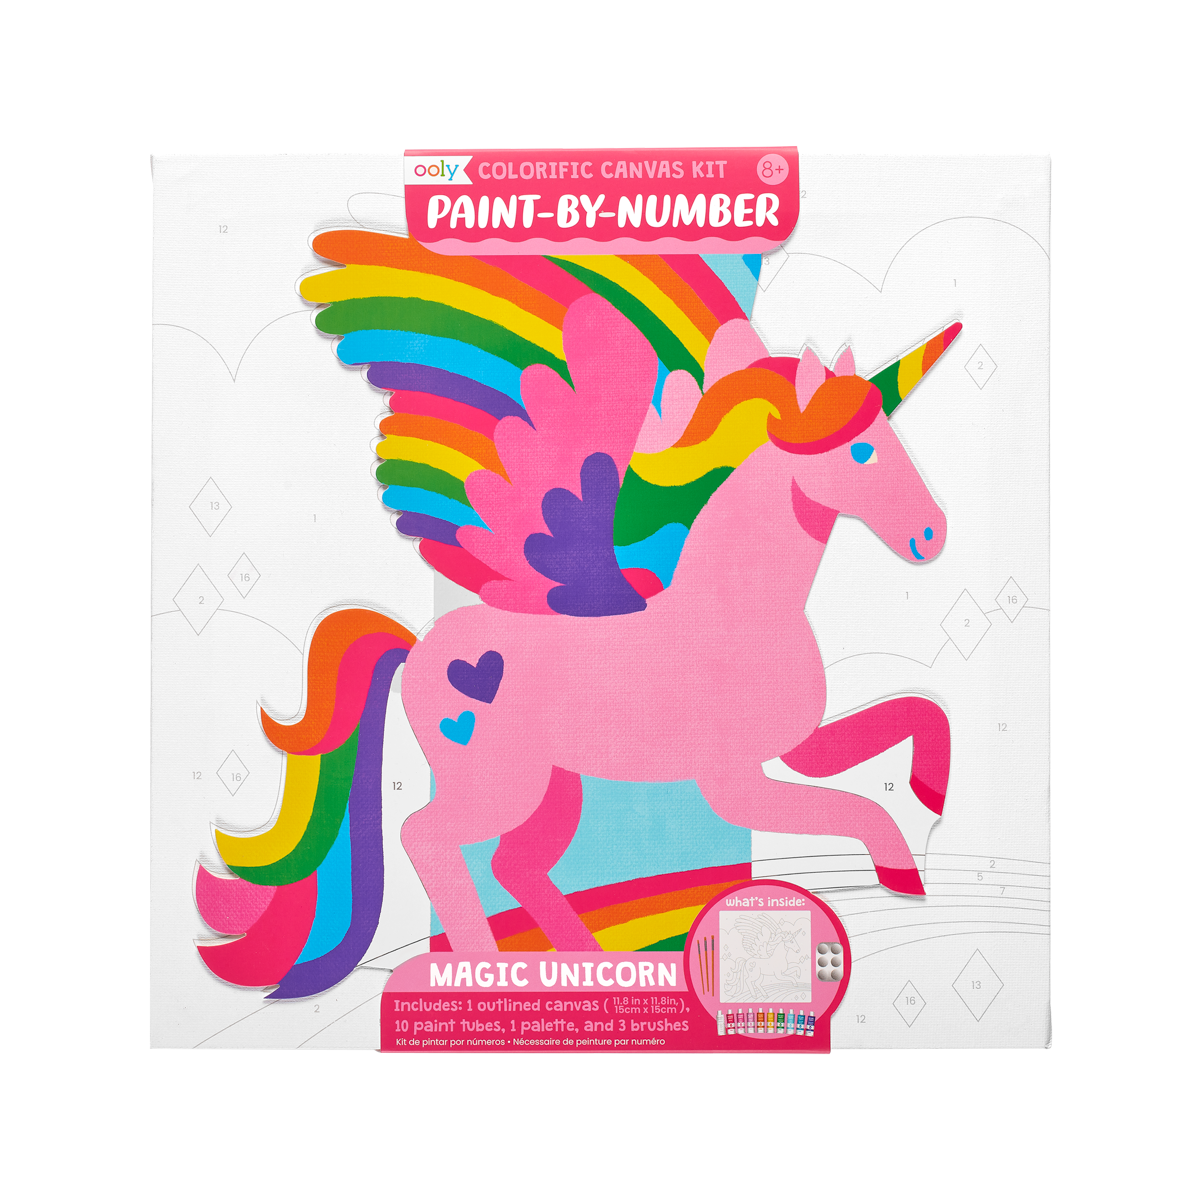 Wholesale Confetti Hound & Library - DIY Paint by Numbers Kit for